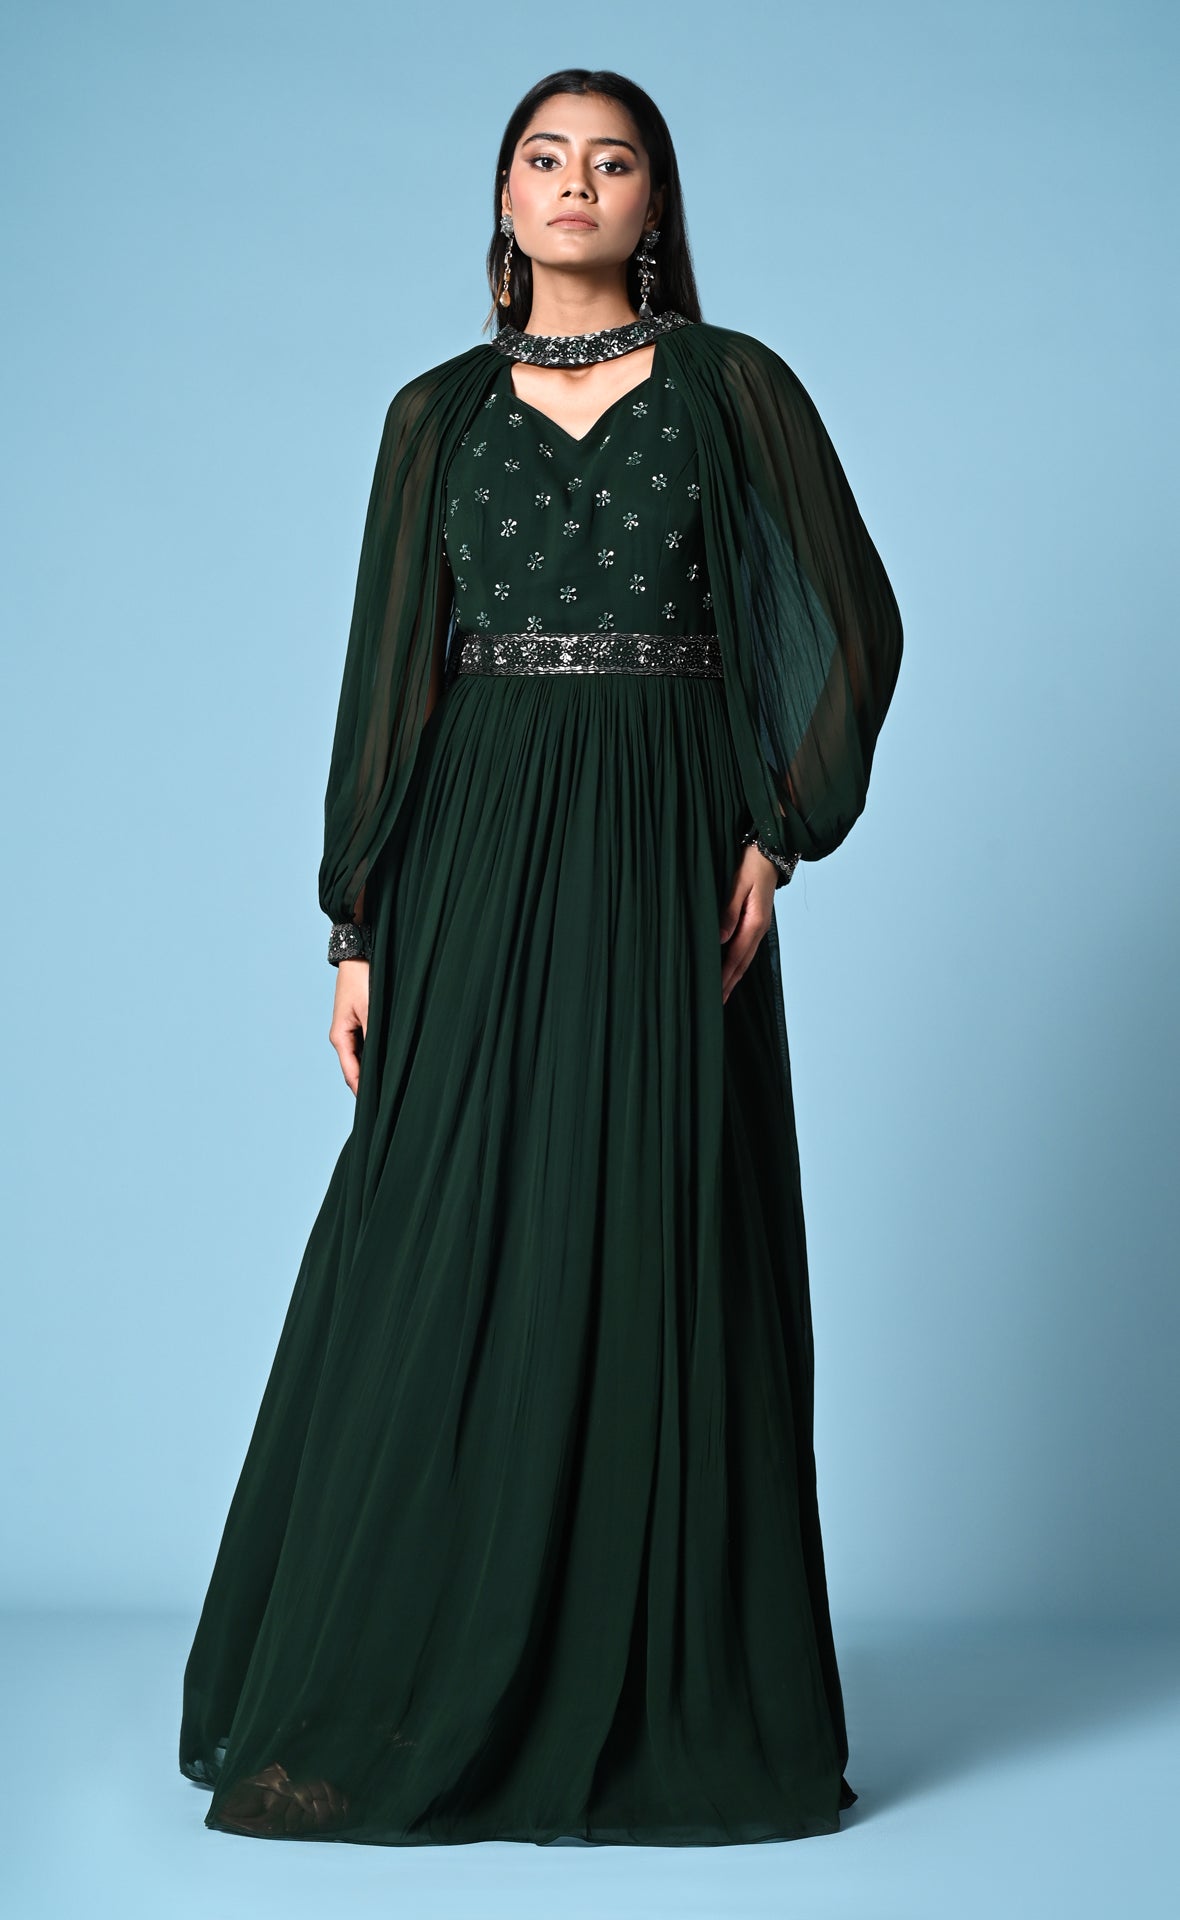 Green cocktail gown with statement sleeve and hip belt